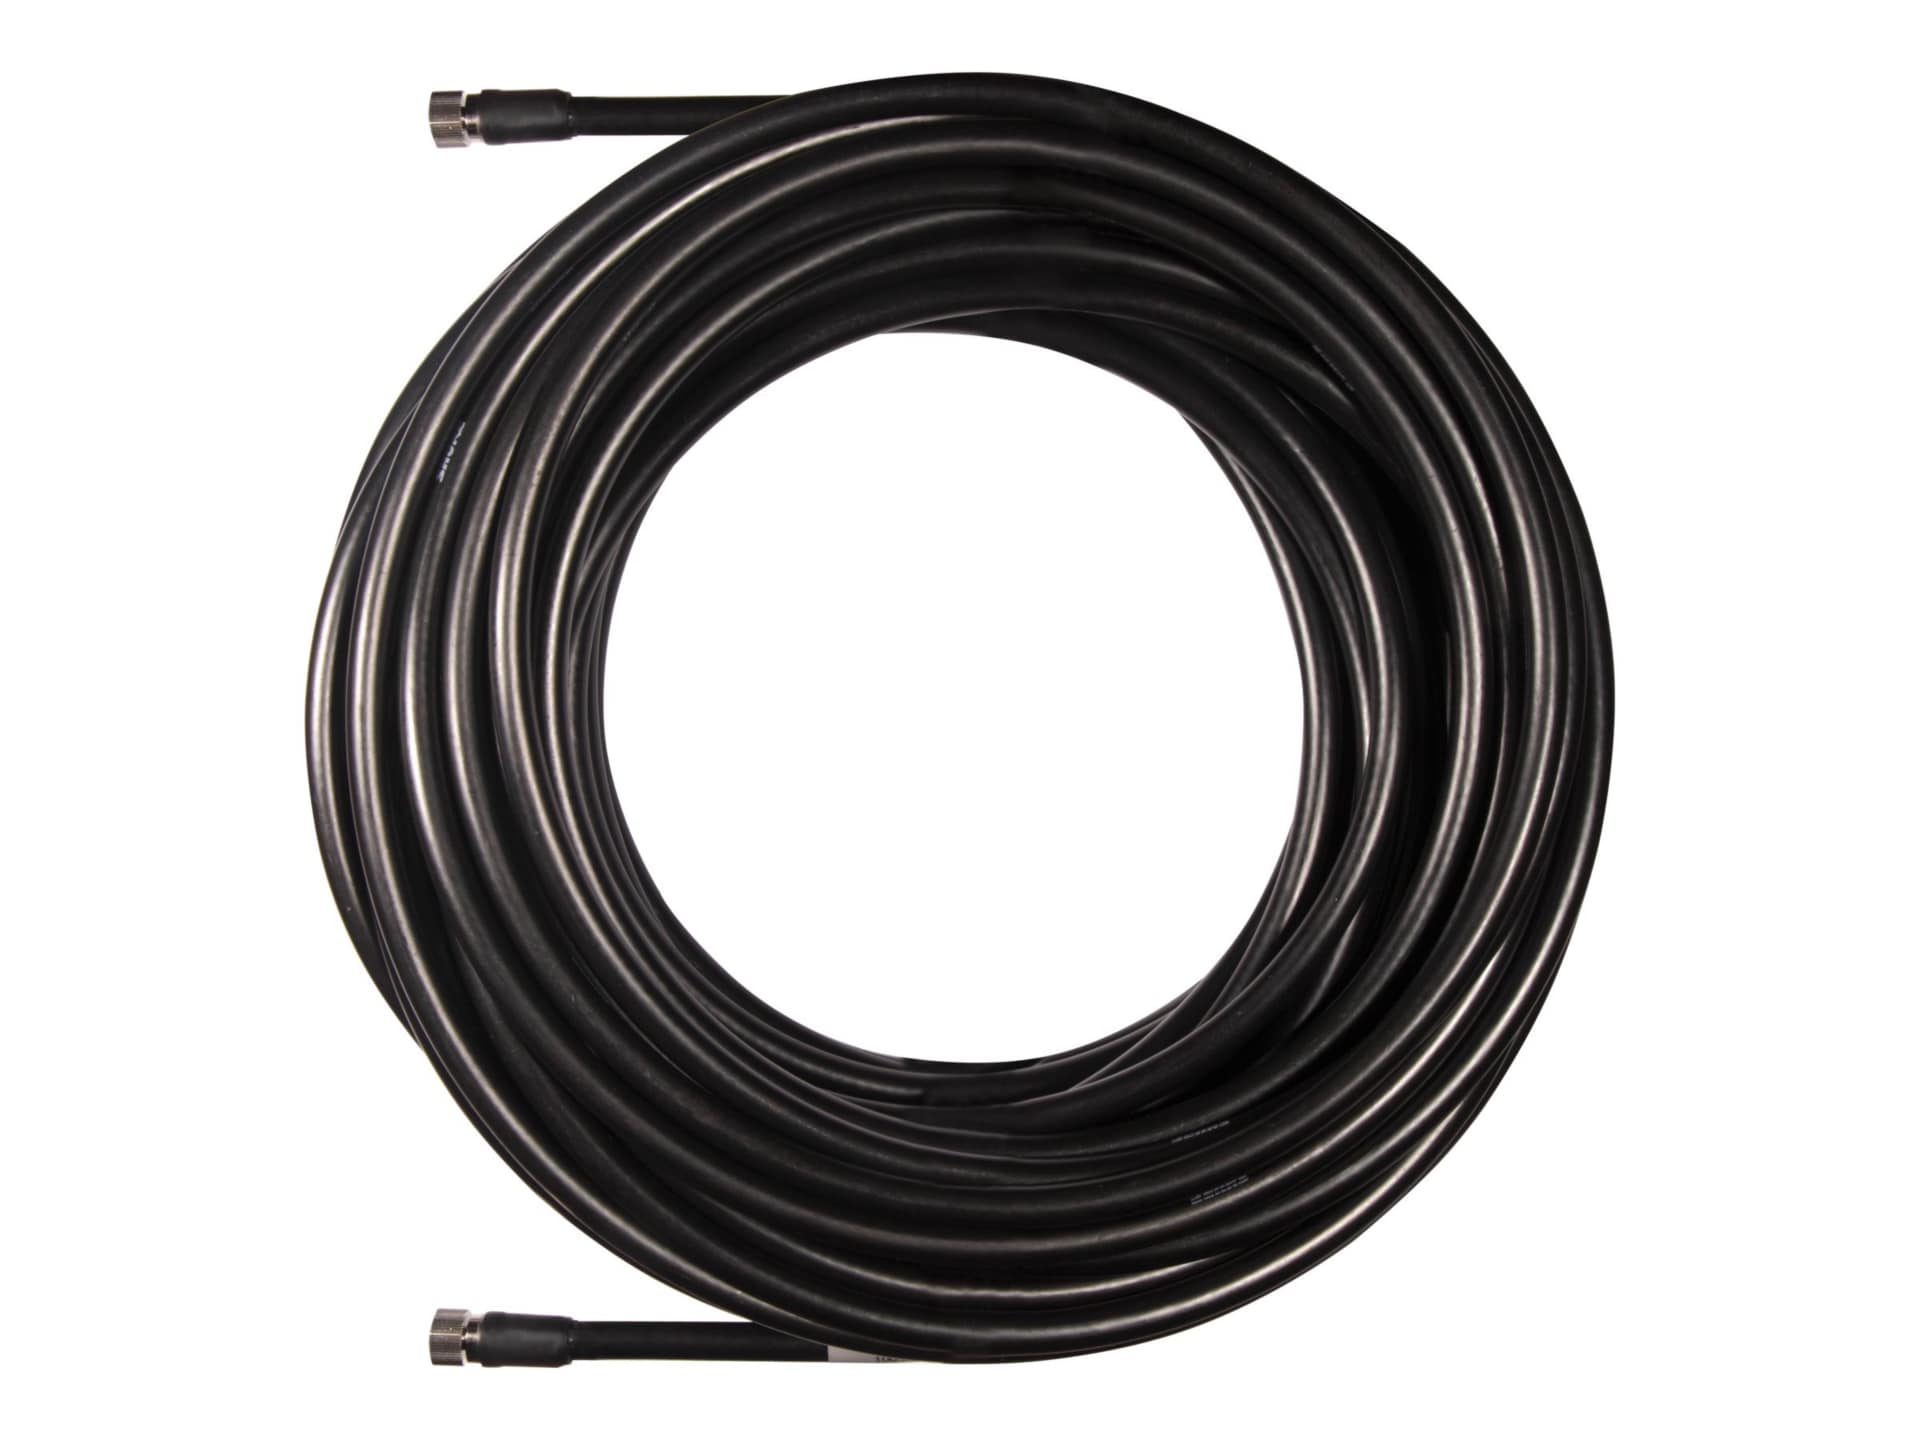 Shure UA8100 - antenna cable - 100 ft